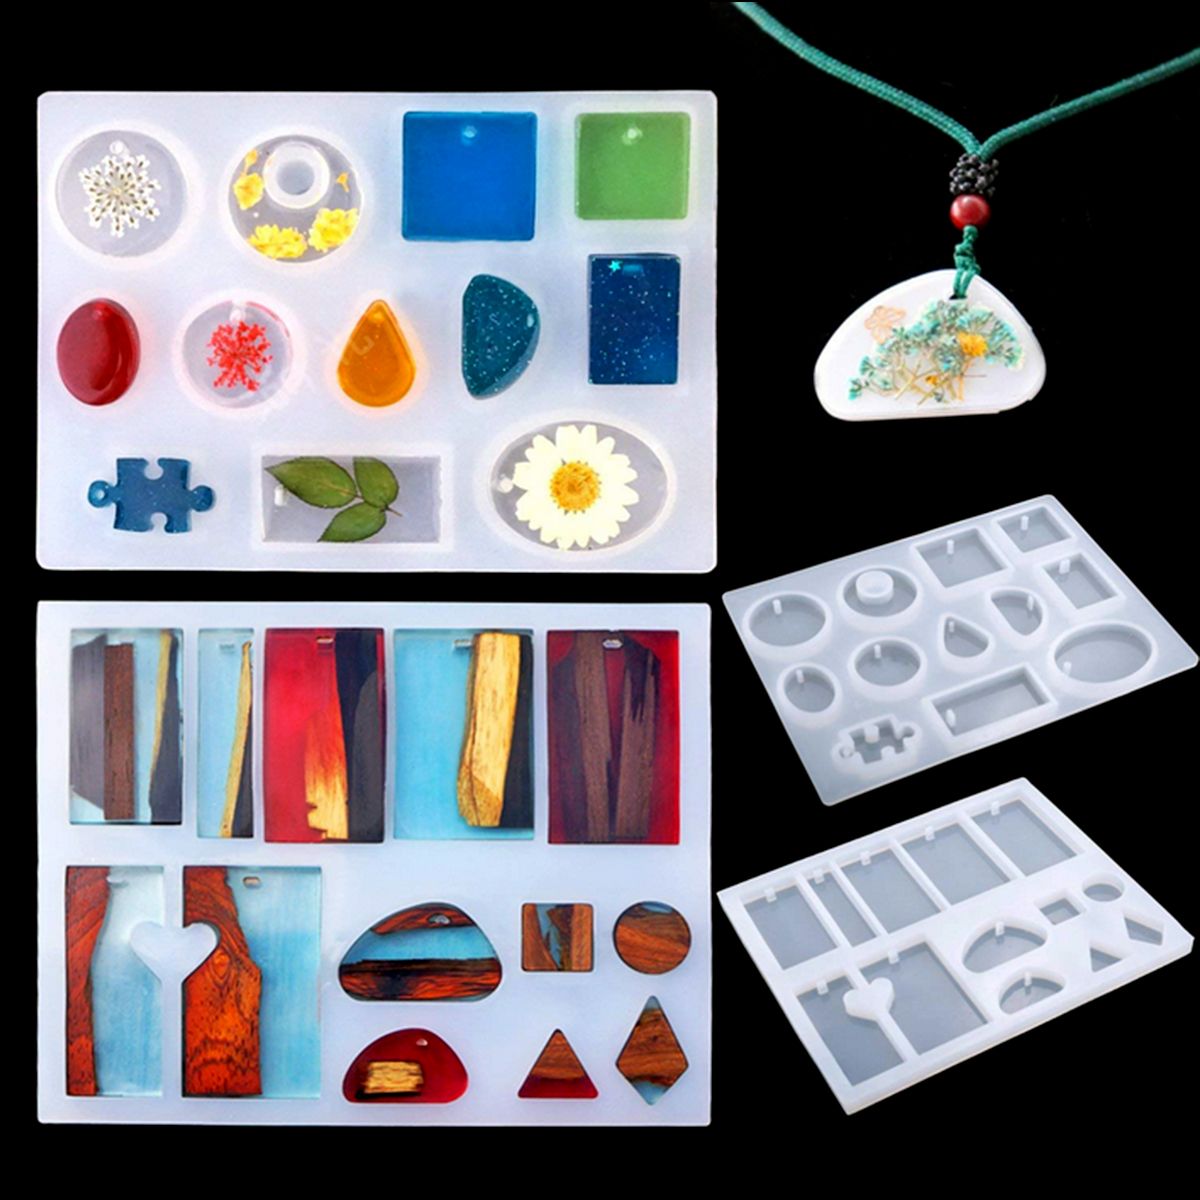 DIY-Resin-Casting-Molds-Silicone-Jewelry-Pendant-Craft-Making-Mould-Pendant-Tool-1532921